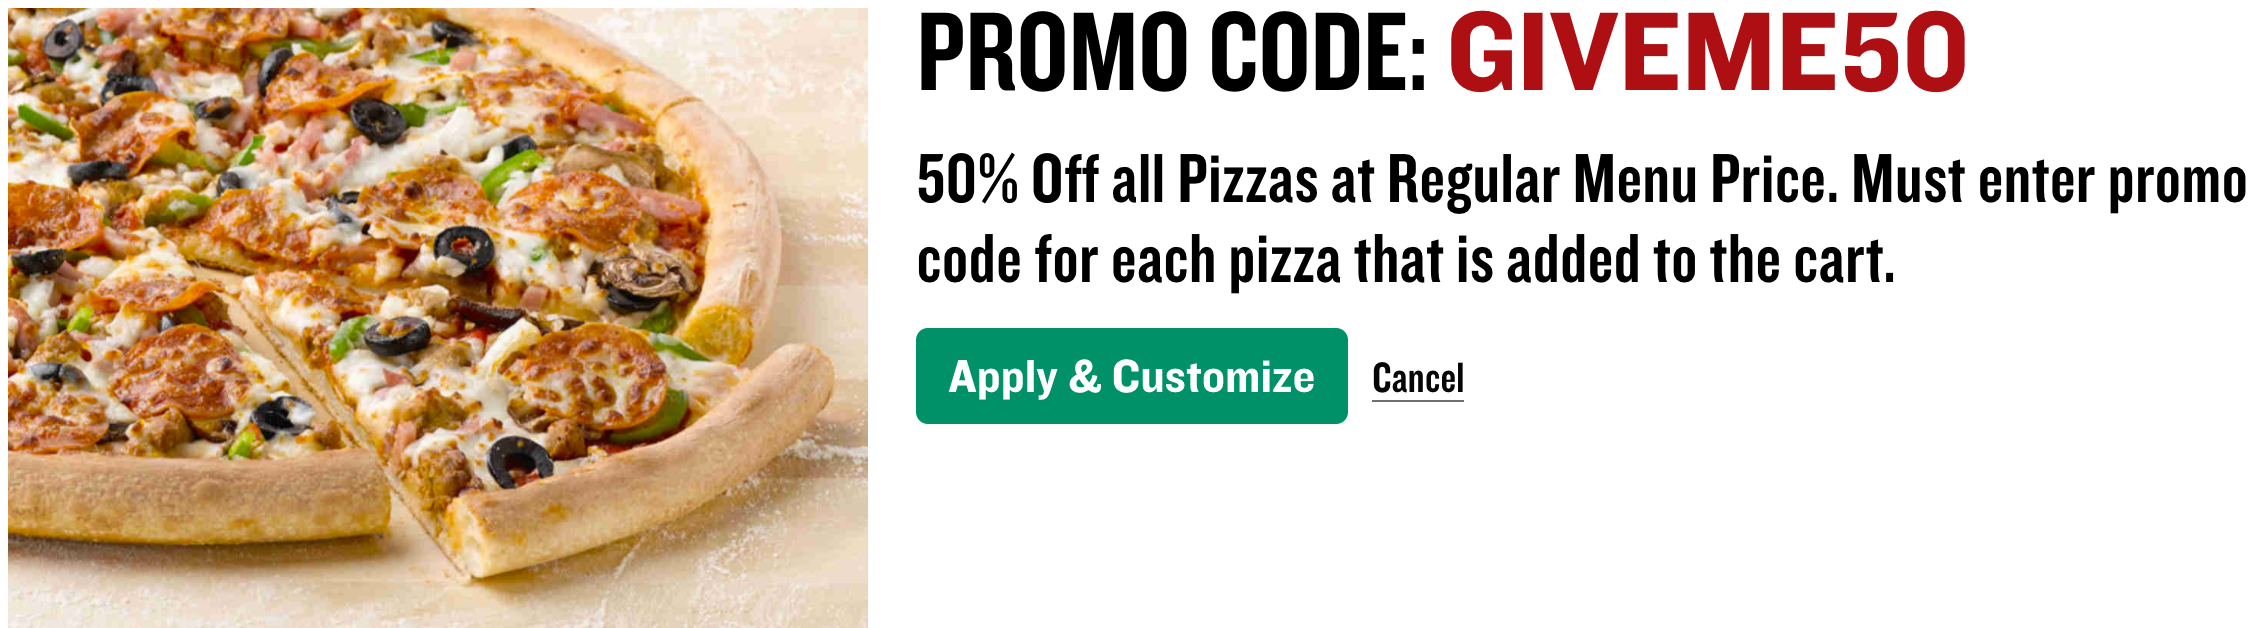 Get a free large 1-topping pizza at Papa Johns when you ...